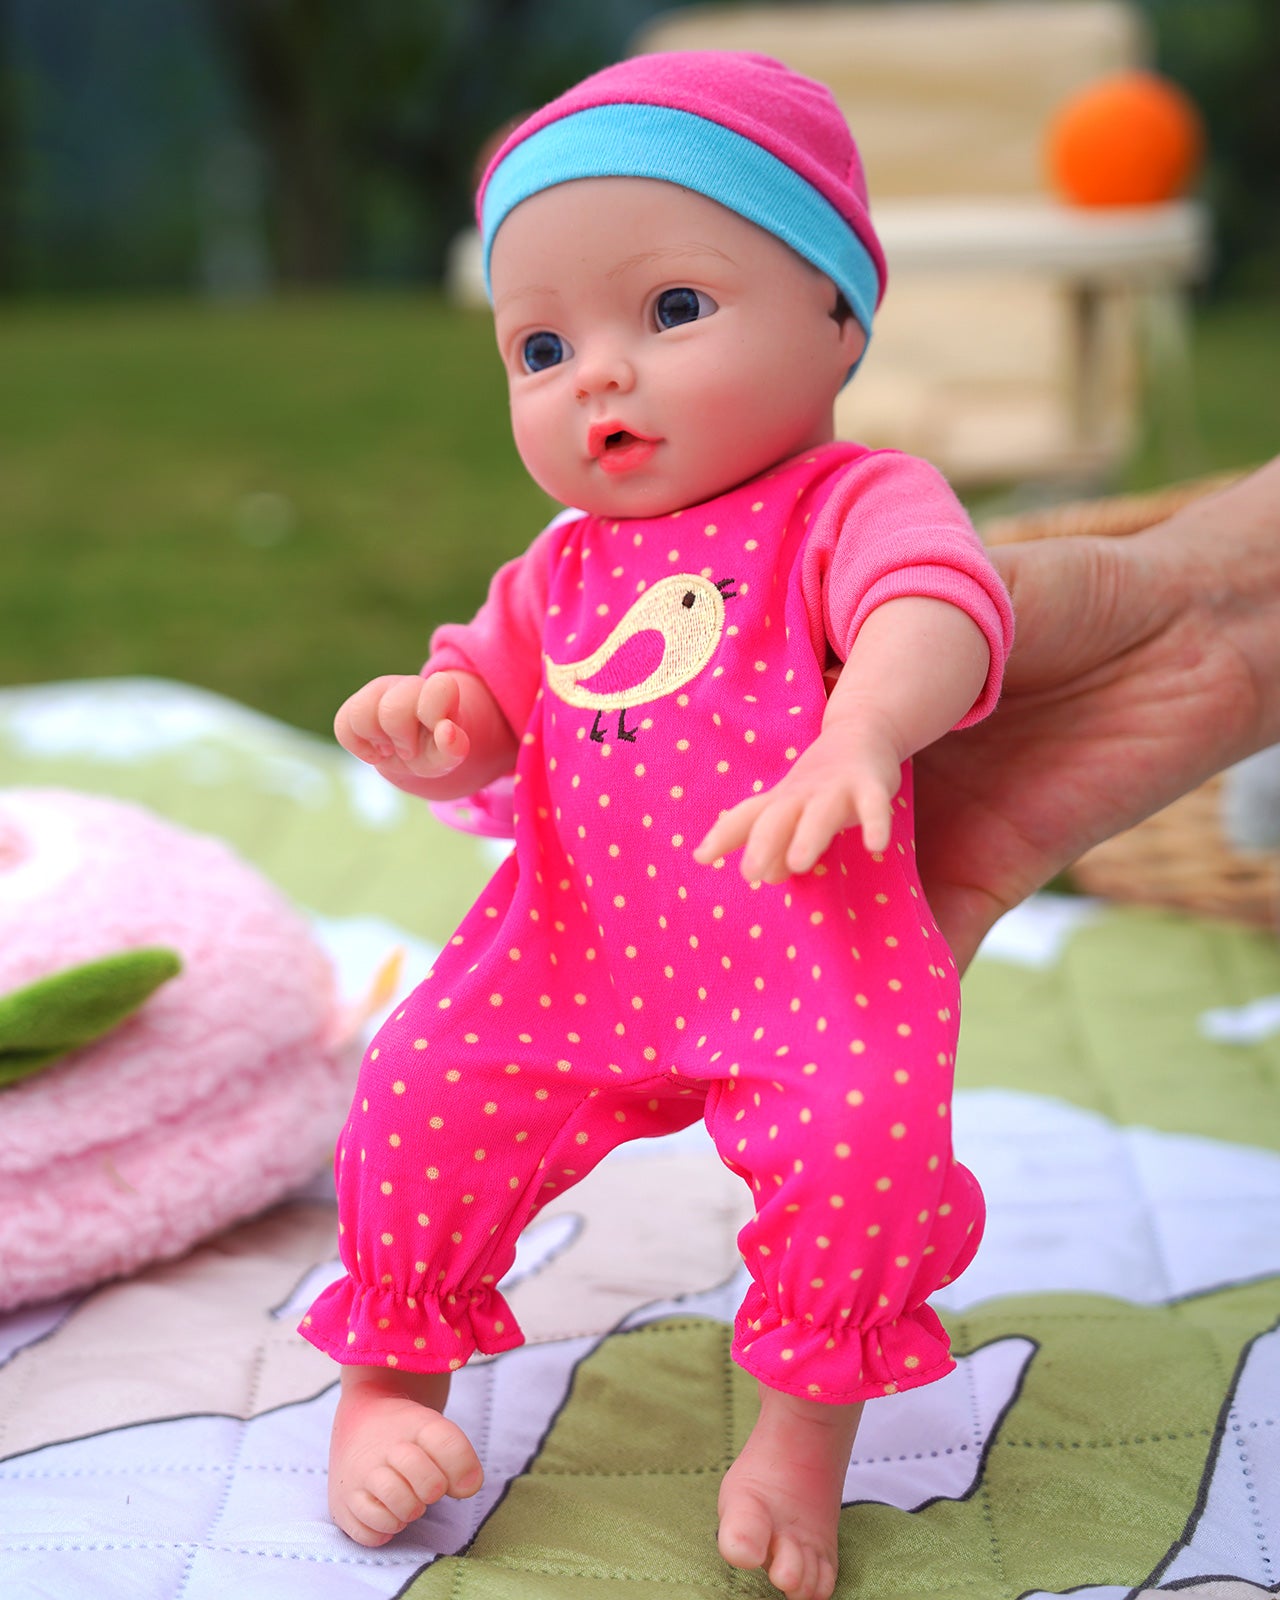 13 Full Silicone Reborn Baby Dolls with Flexible Limbs Can Pose What You Want